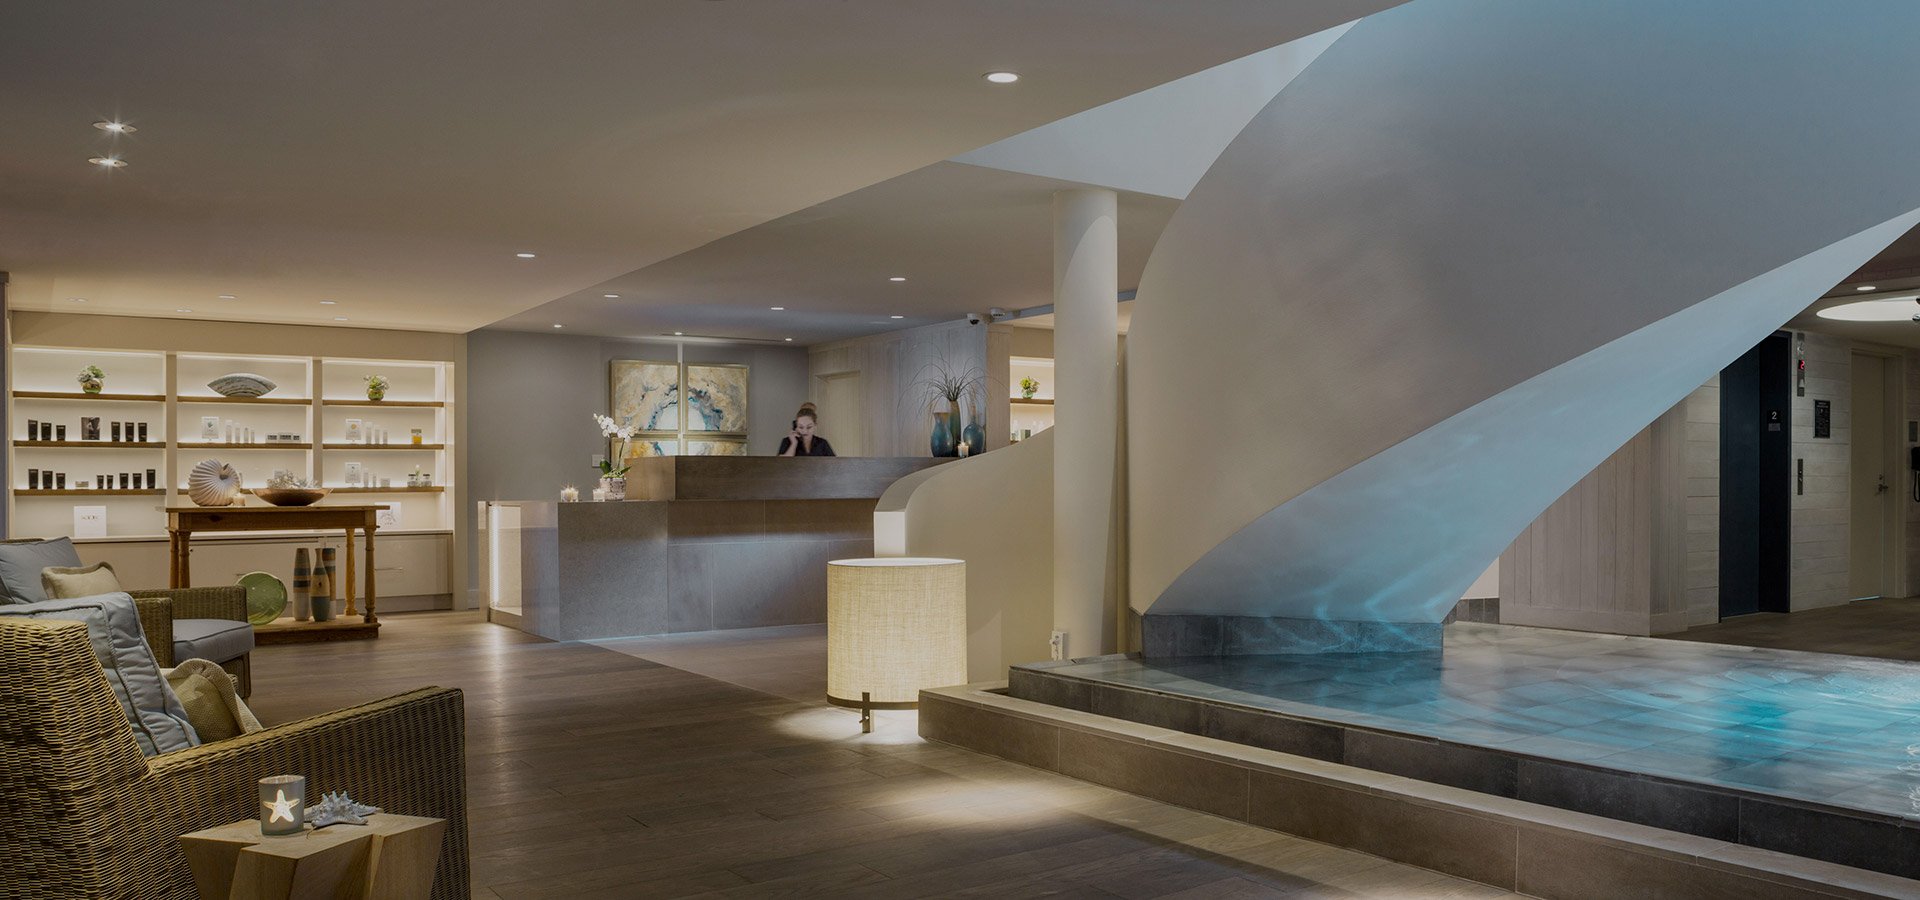 Spa At Cliff House Maine Contact Us